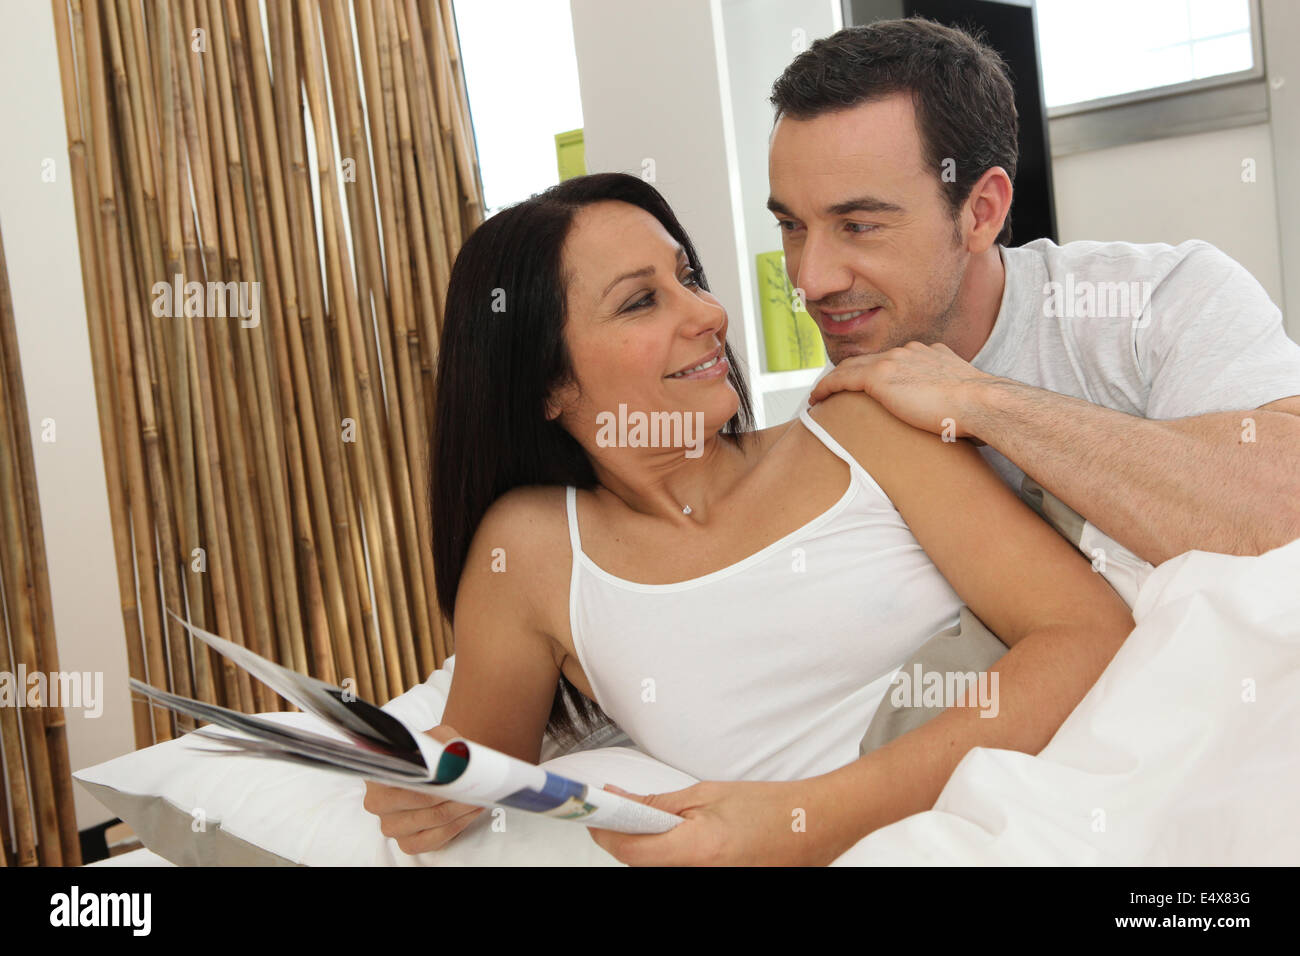 Couple in bed reading magazine Banque D'Images